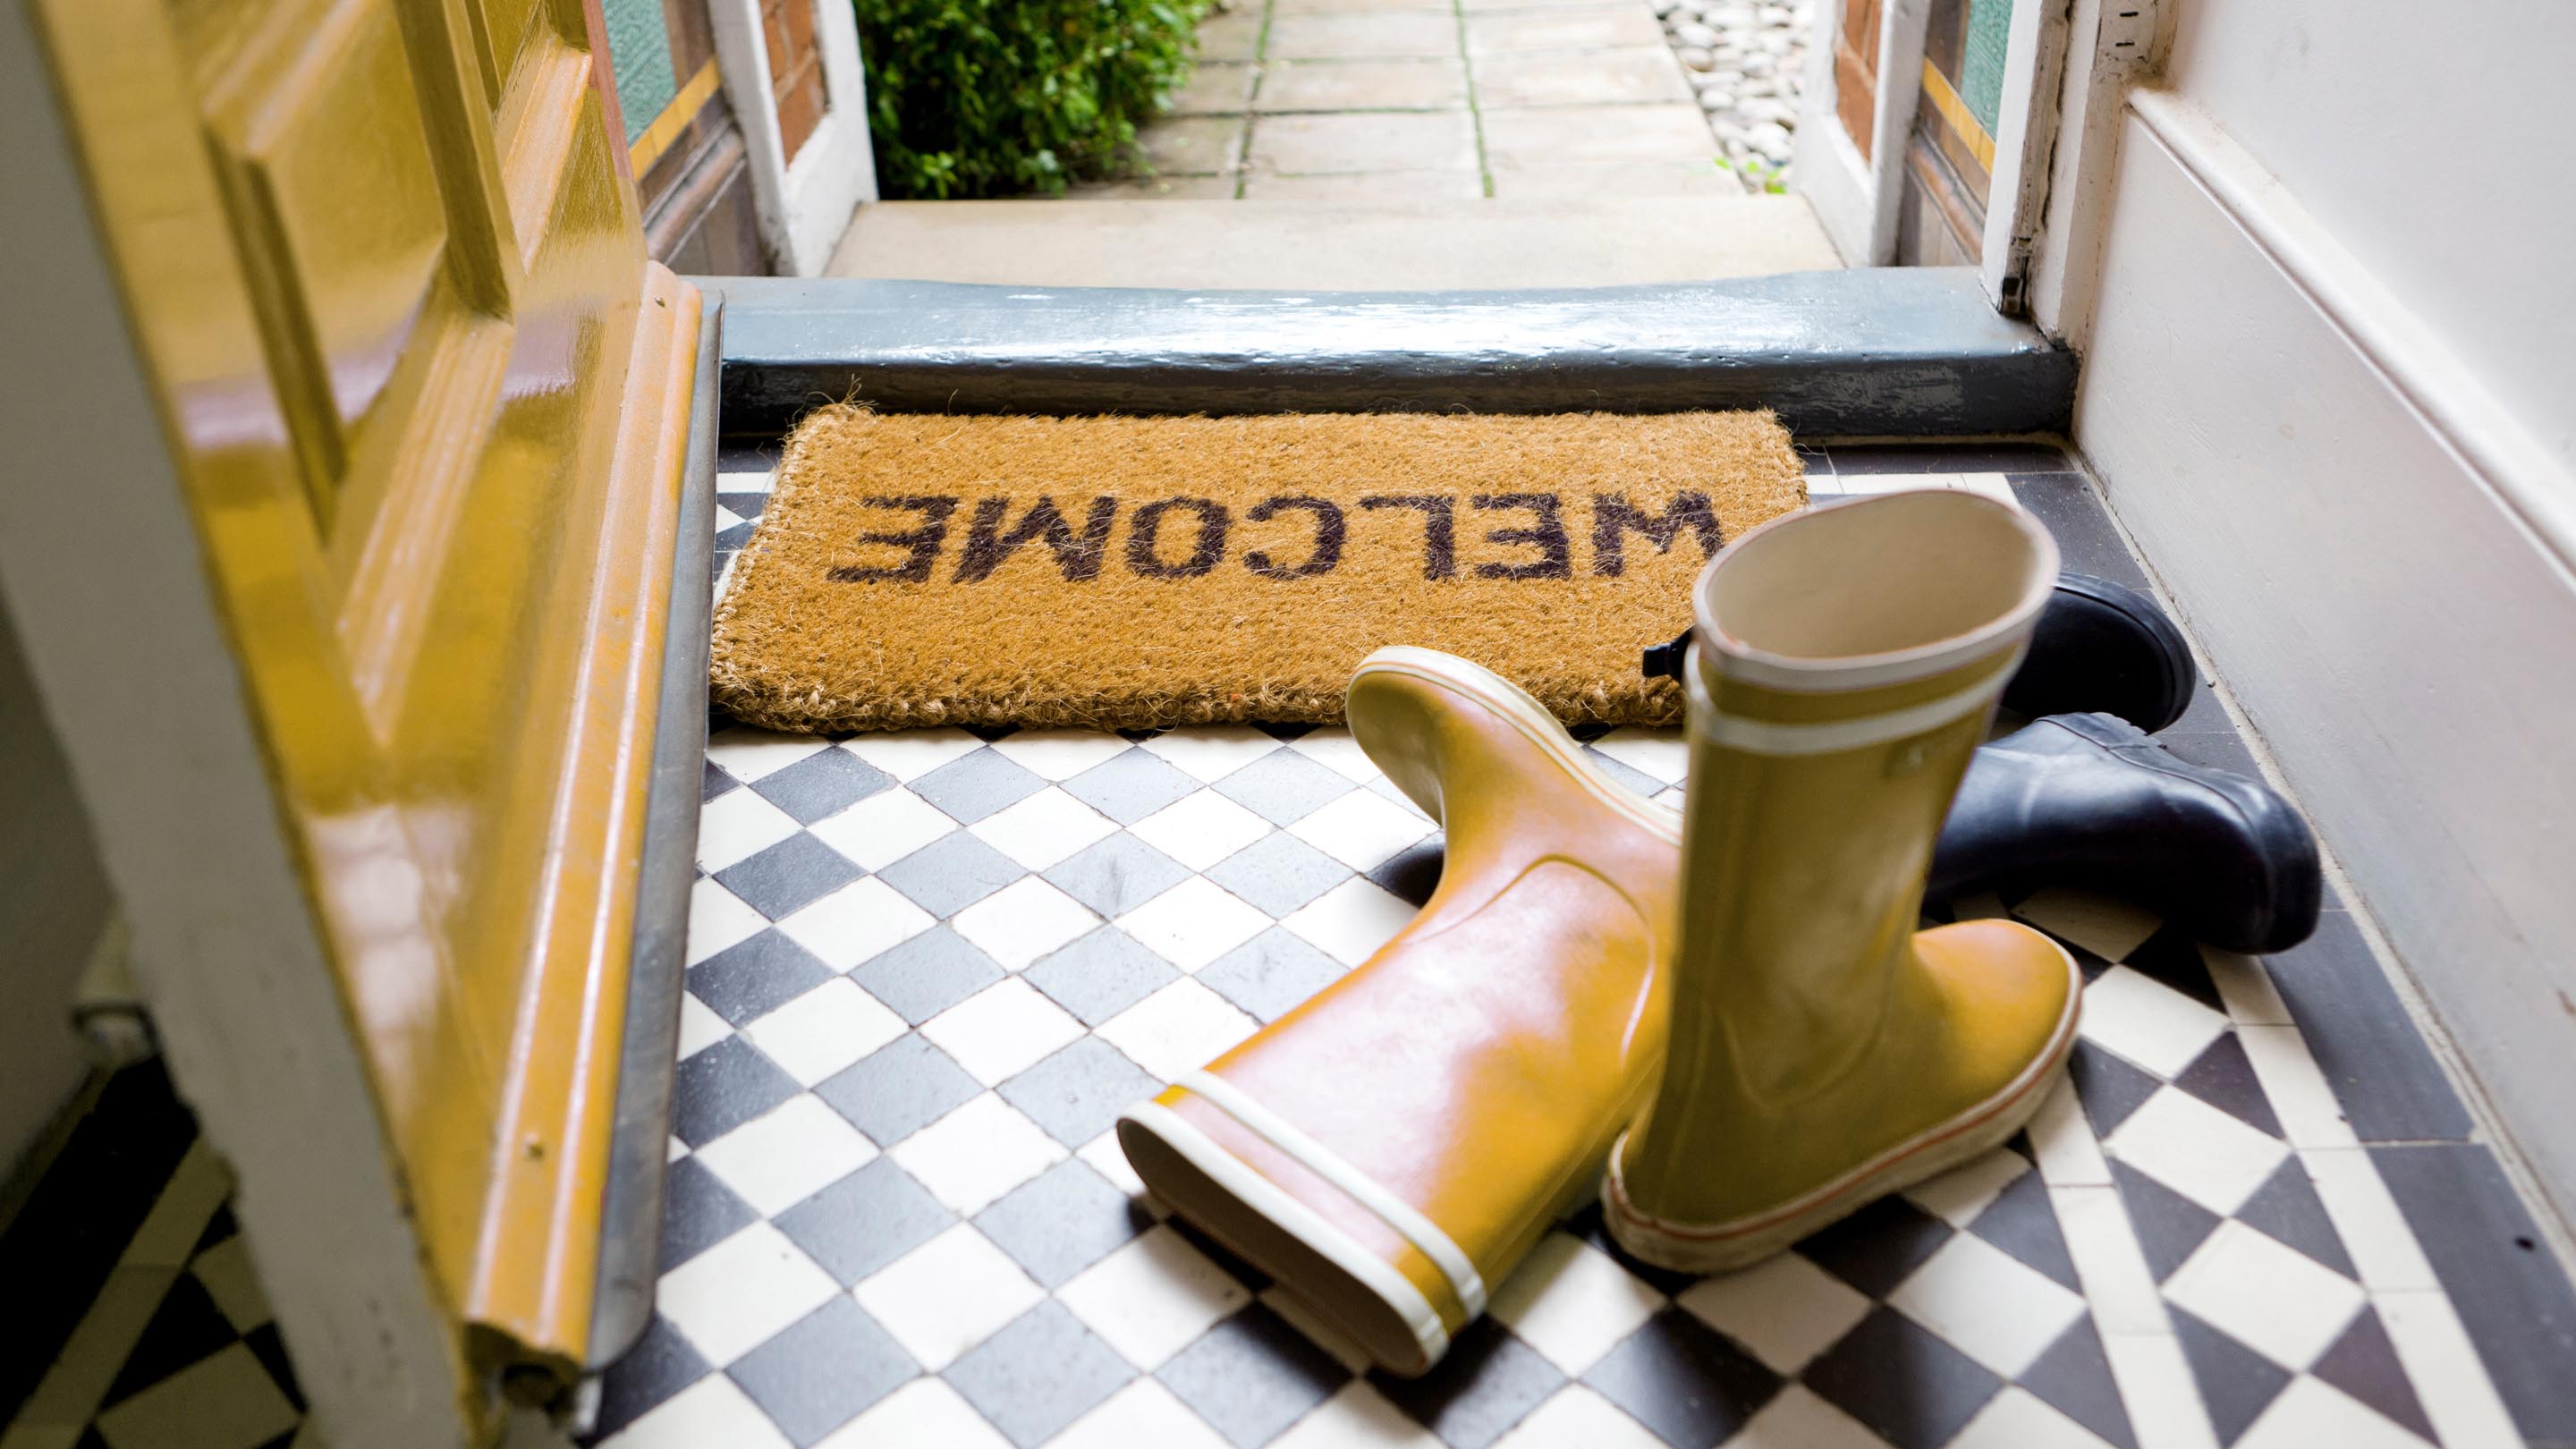 Welcome mat on an open doorstep with yellow wellies